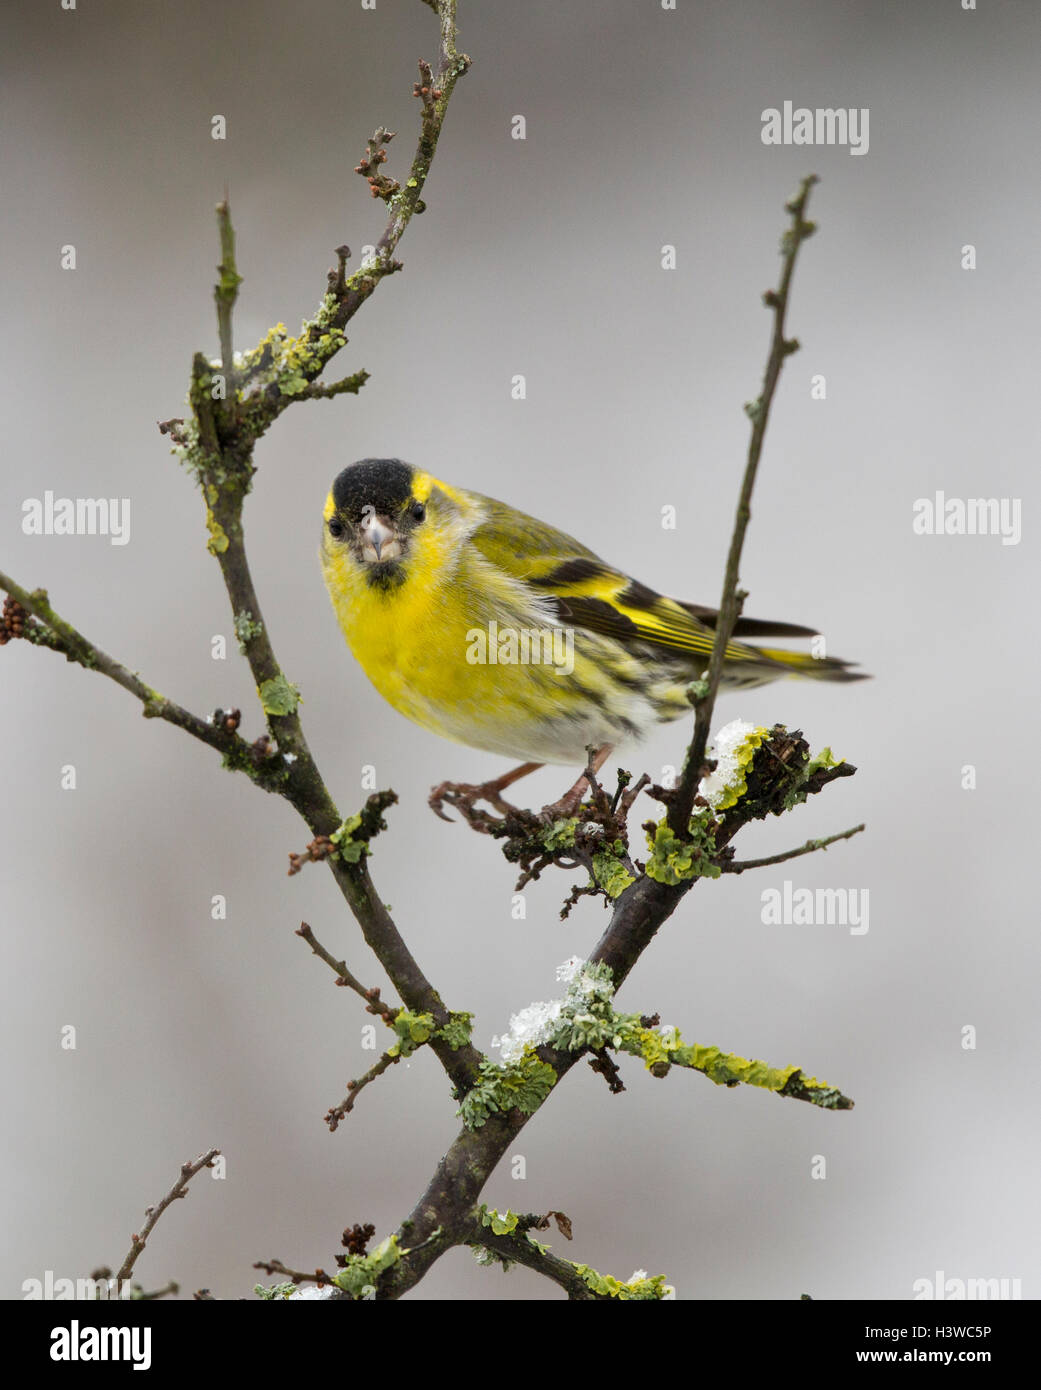 Male Eurasian Siskin, Carduelis spinus, perching on branch in winter snow Stock Photo